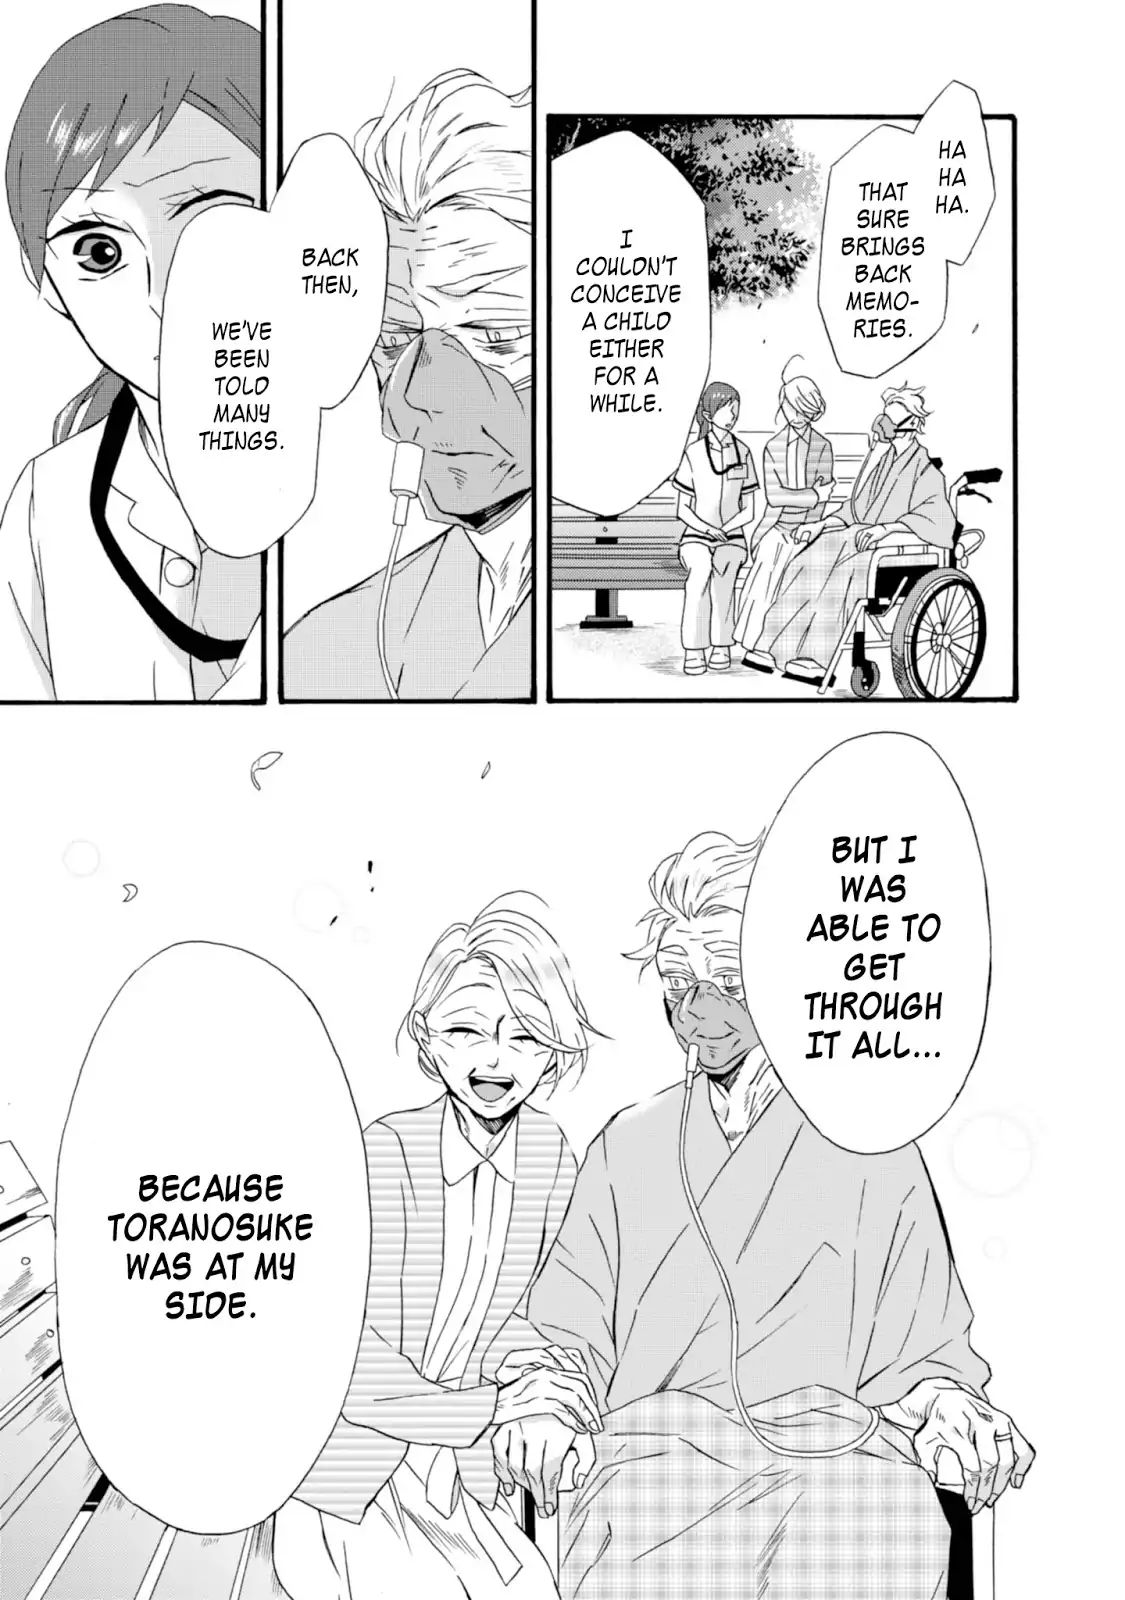 Will You Marry Me Again If You Are Reborn? Vol.2 Chapter 9: When I'm With You - Picture 3